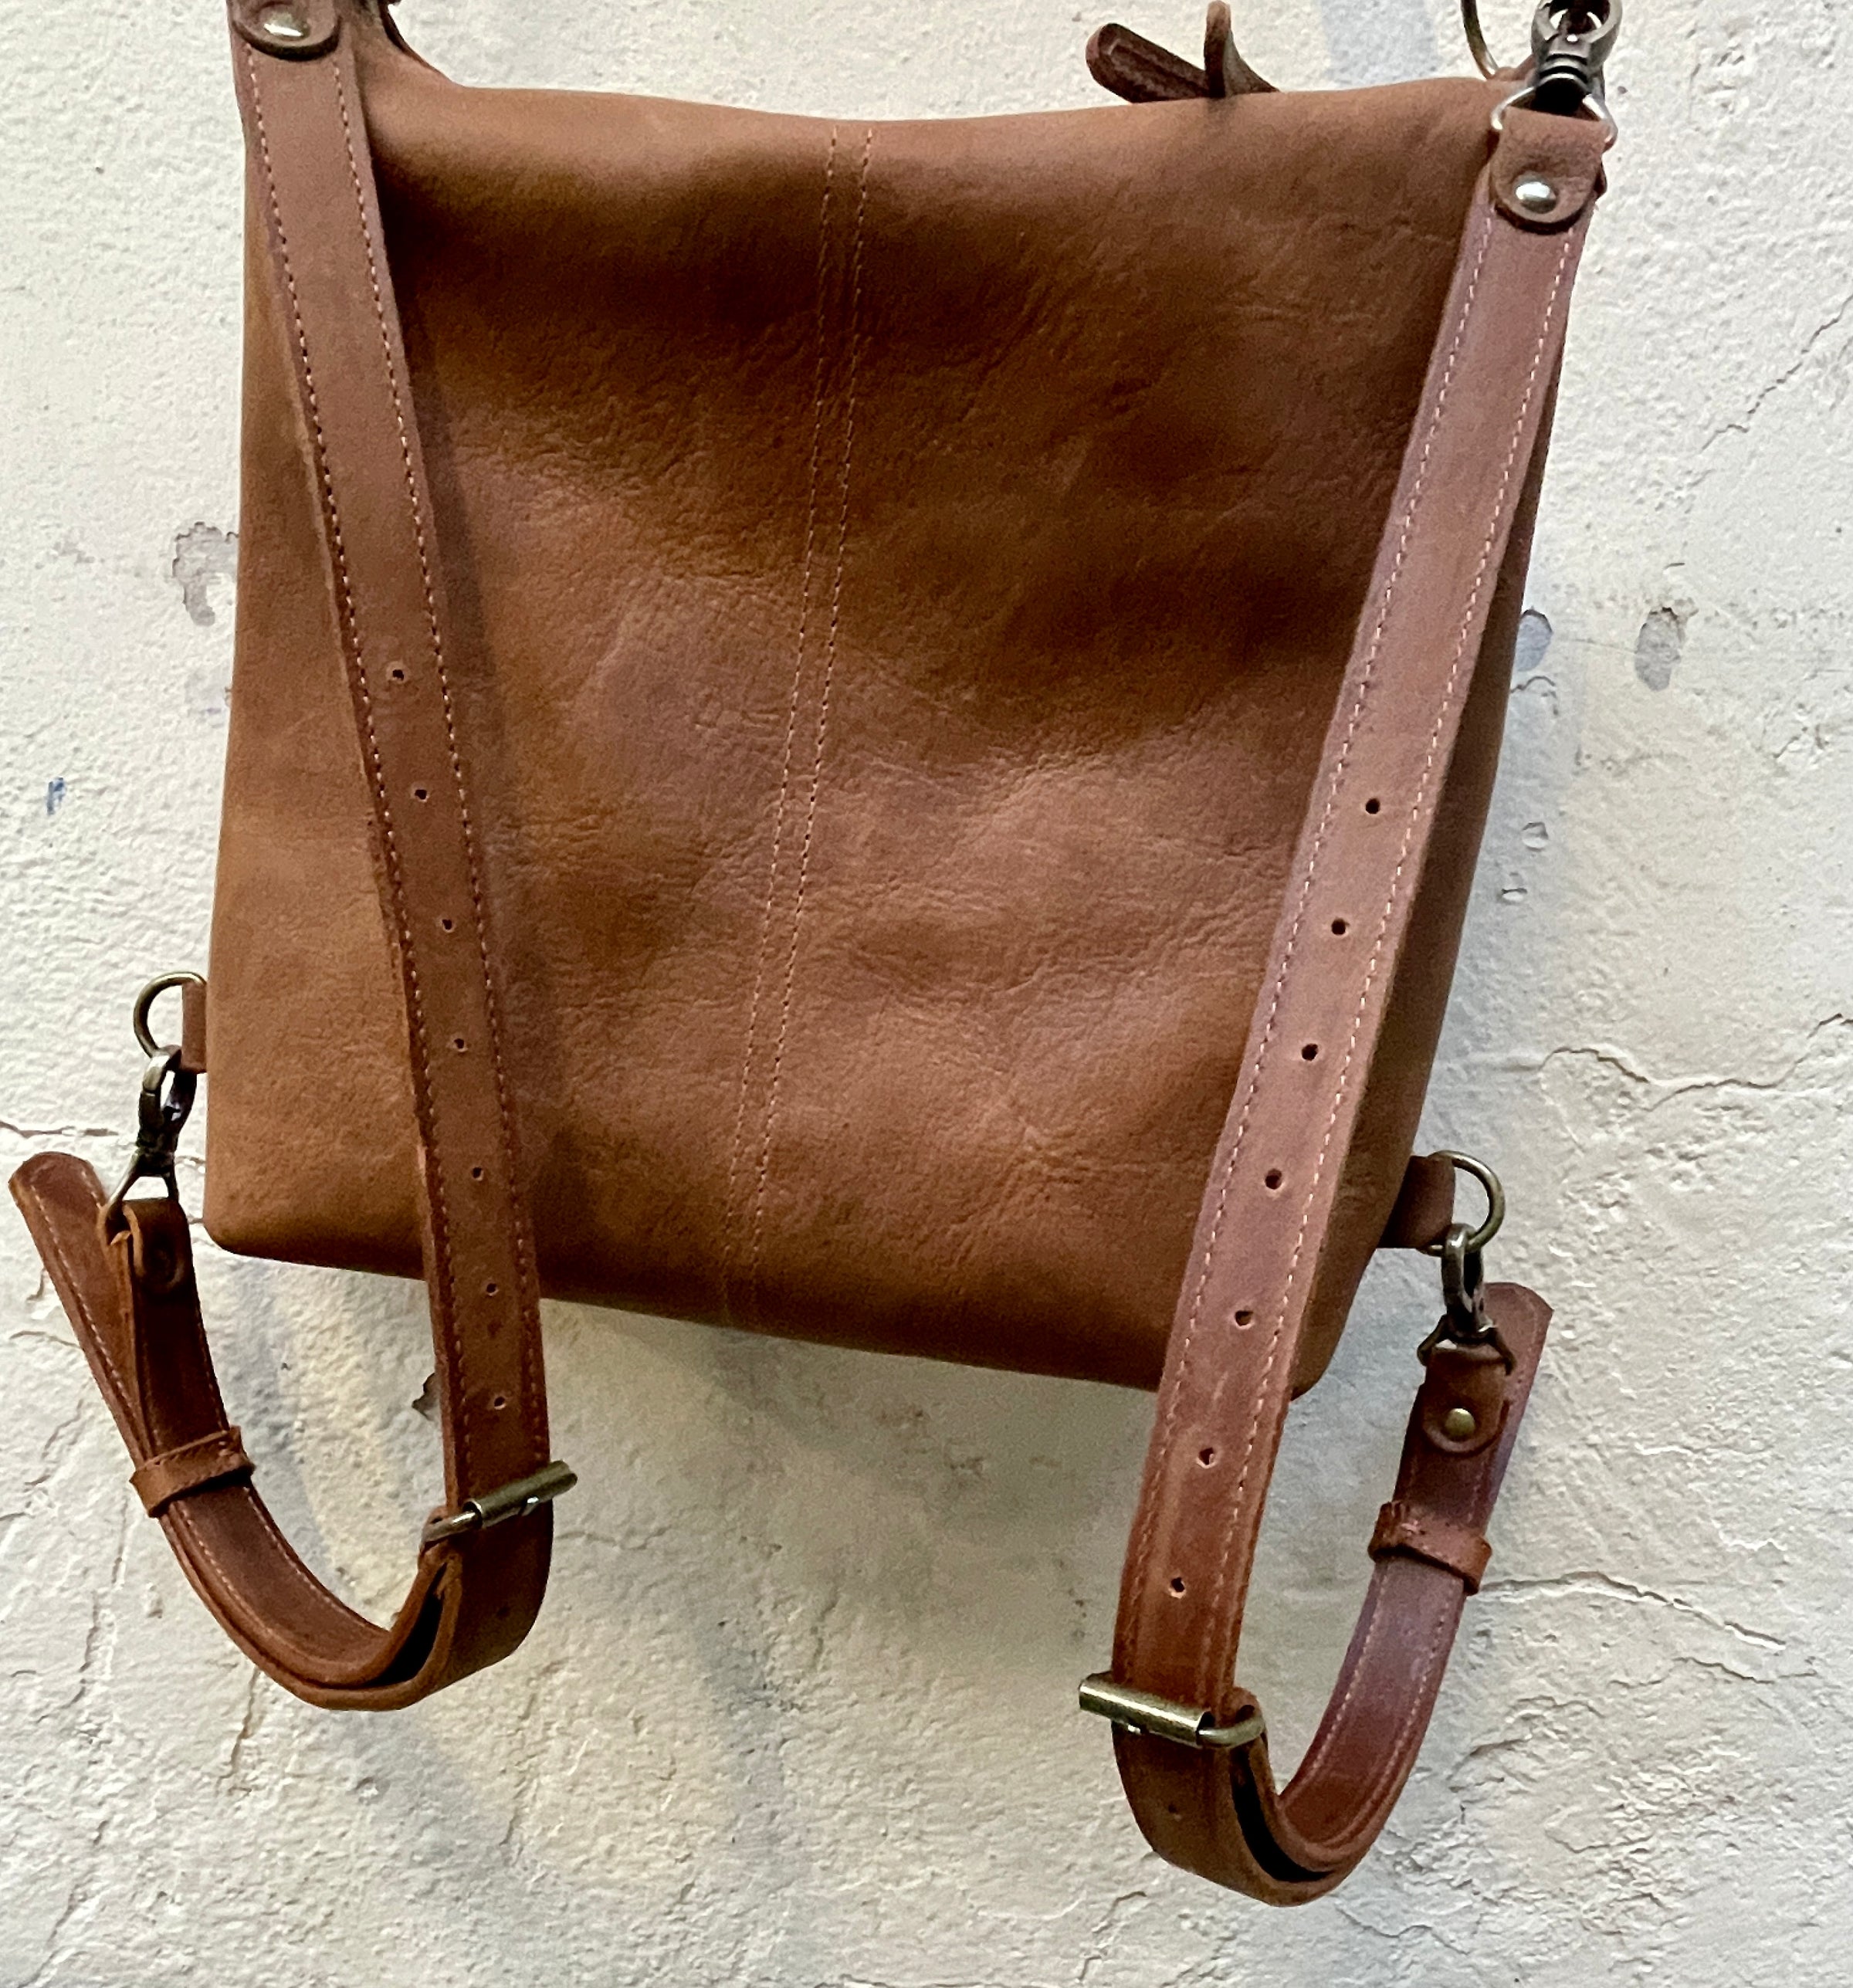 Rosa Convertible Accordion Bag in English Tan Bridle Leather - Handcrafted  Convertible Leather Backpacks and Purses for Daily or Motorcycle Use